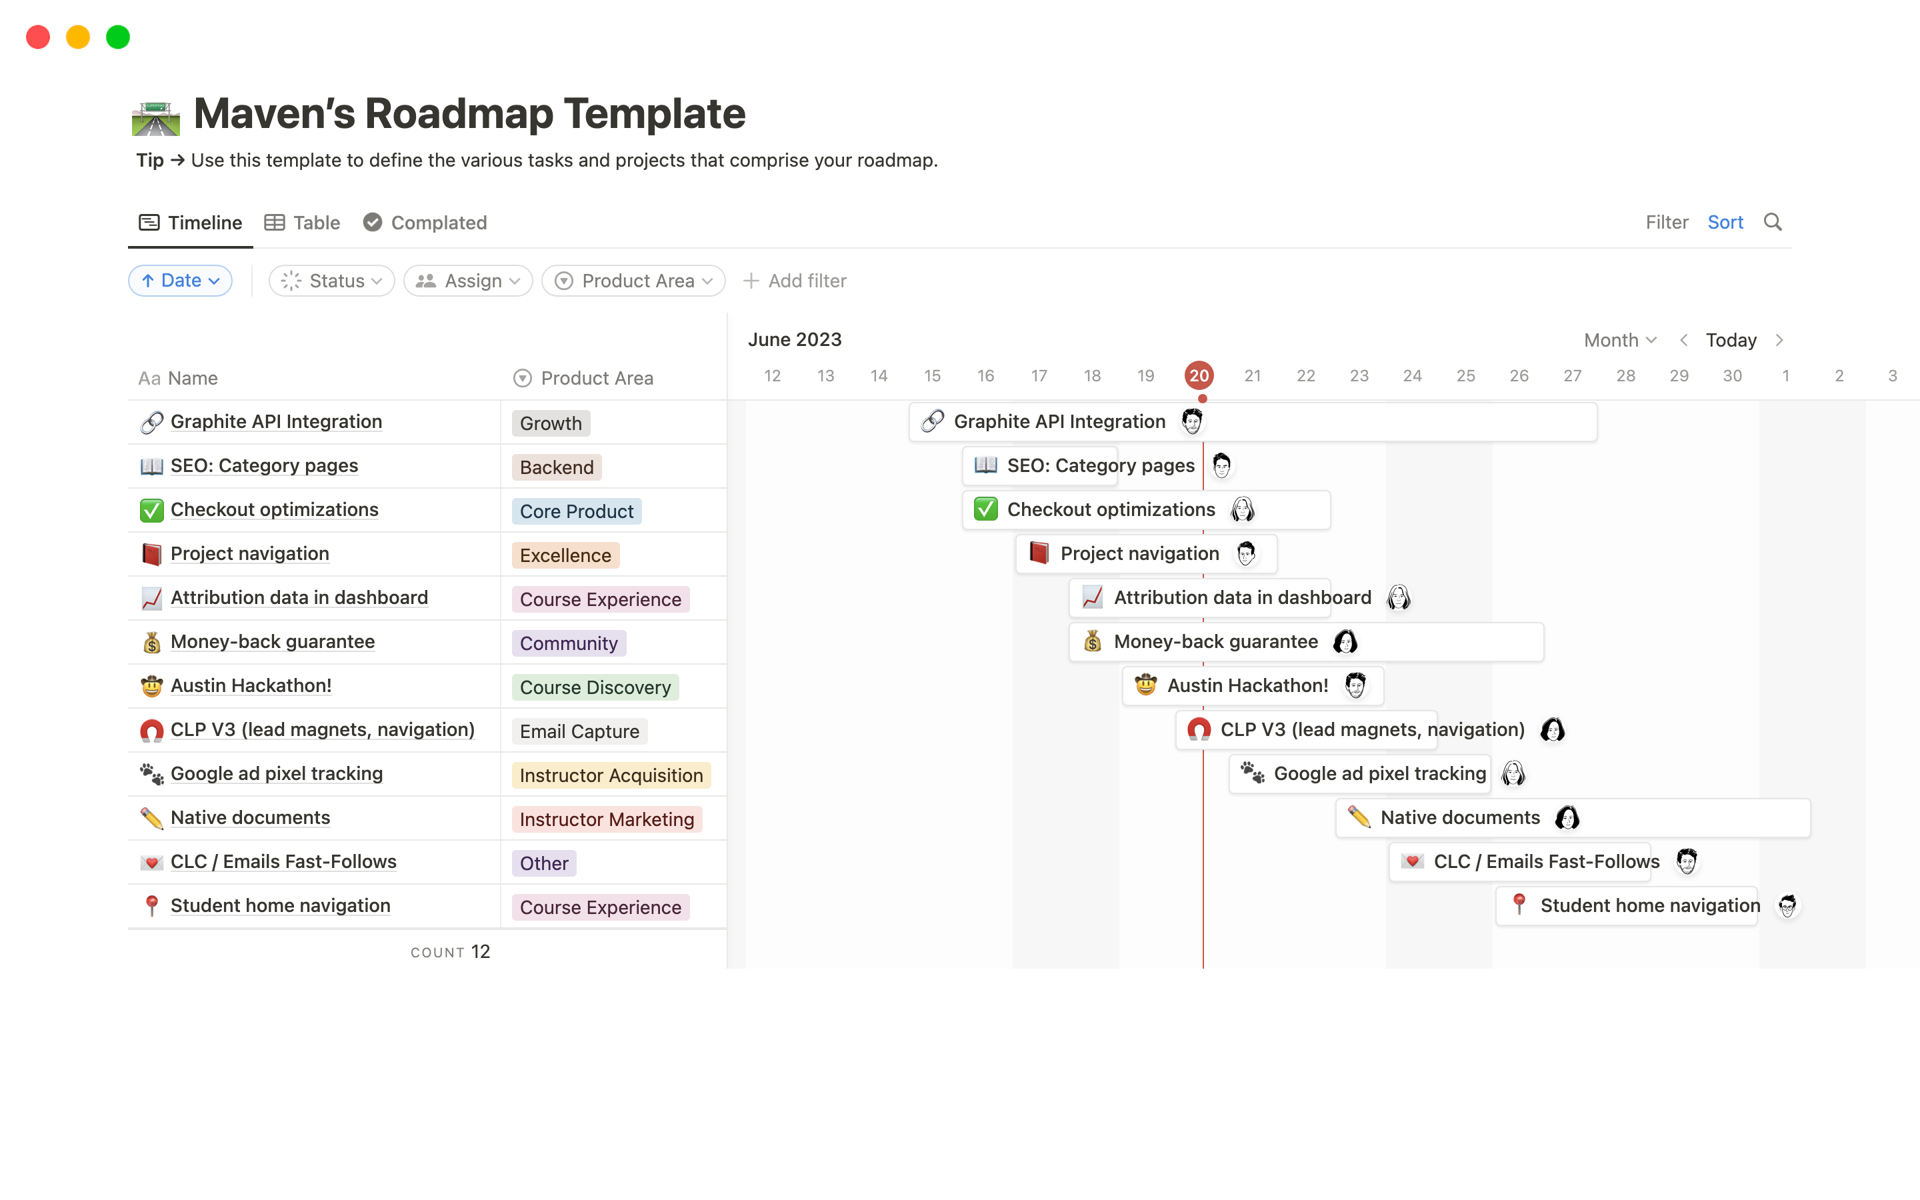 Outline the various projects and tasks that comprise your roadmap.